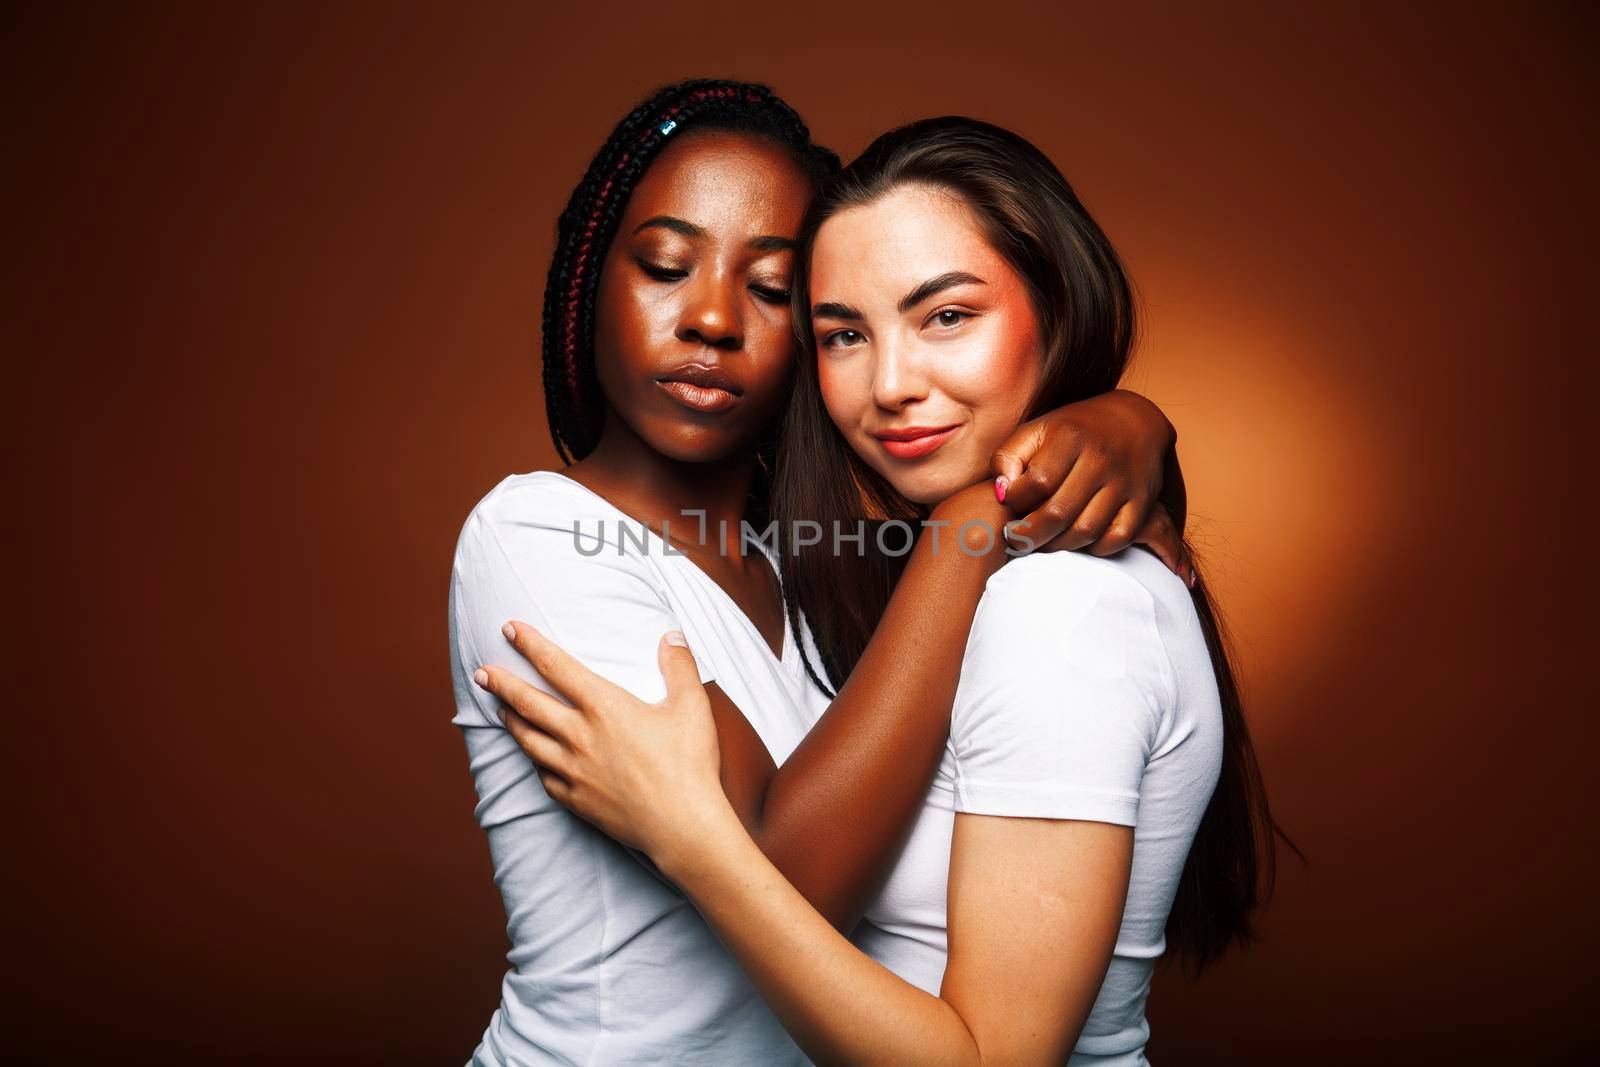 young pretty caucasian, afro woman posing cheerful together on brown background, lifestyle diverse nationality people concept closeup